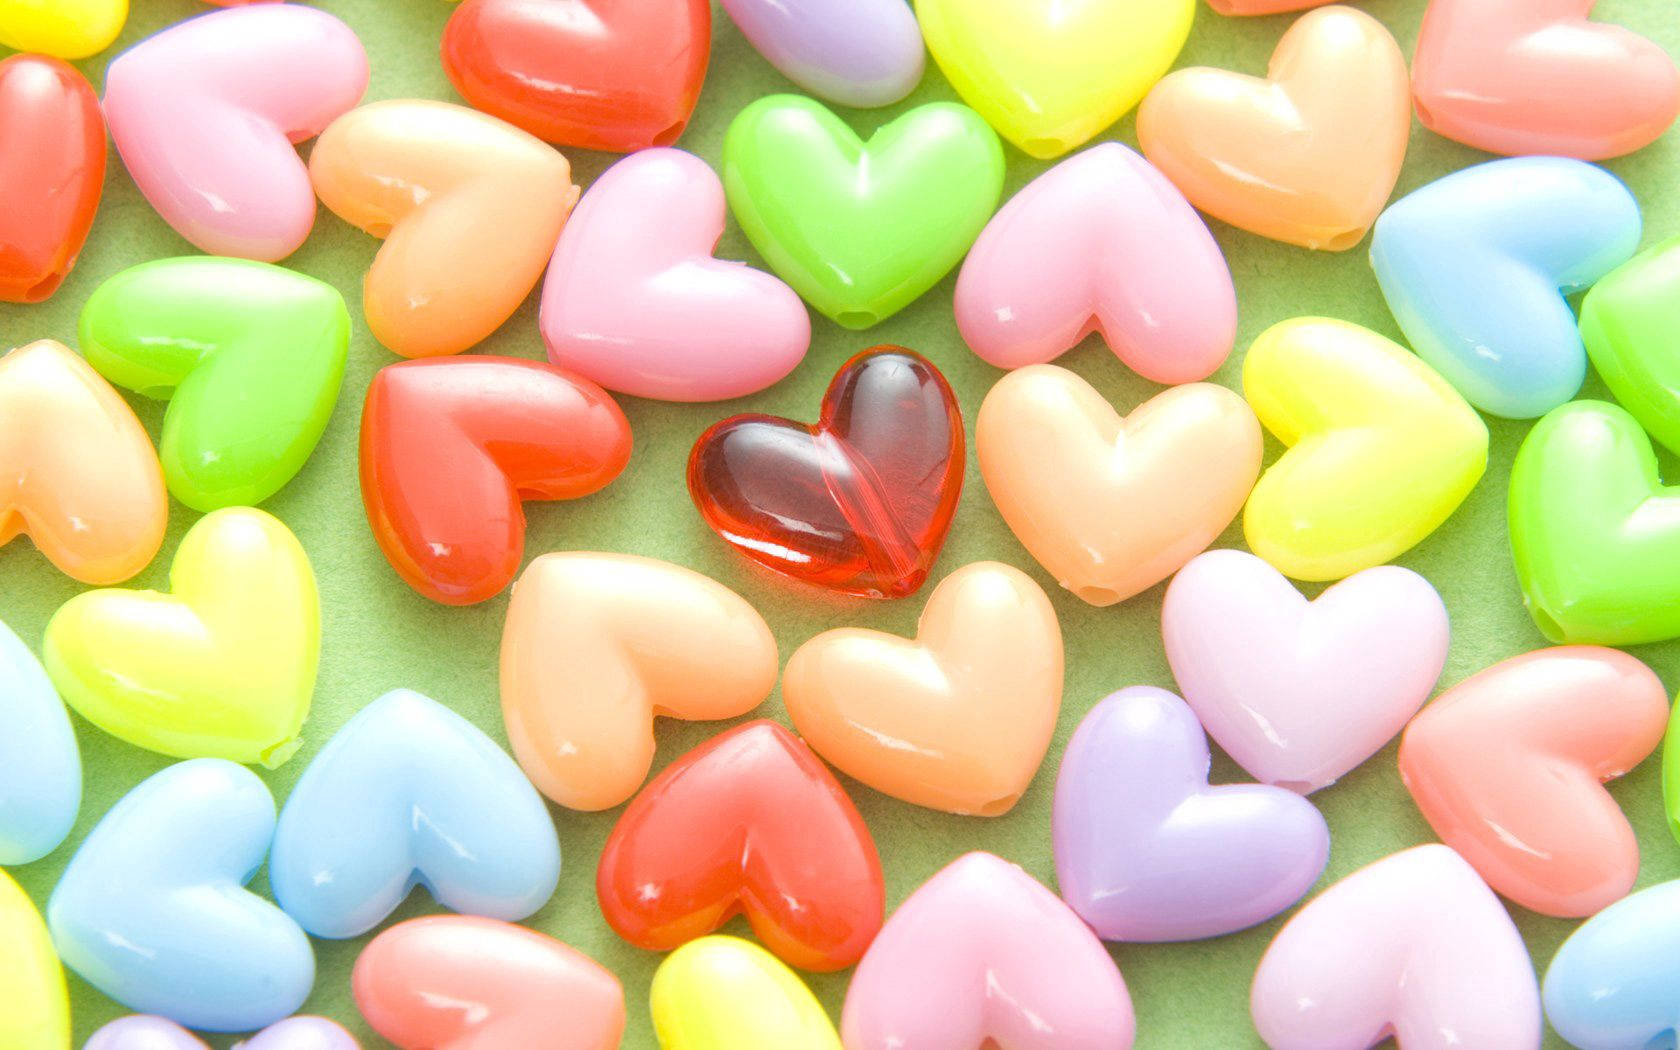 Add a splash of color to your home with this vibrant display of hearts. Wallpaper